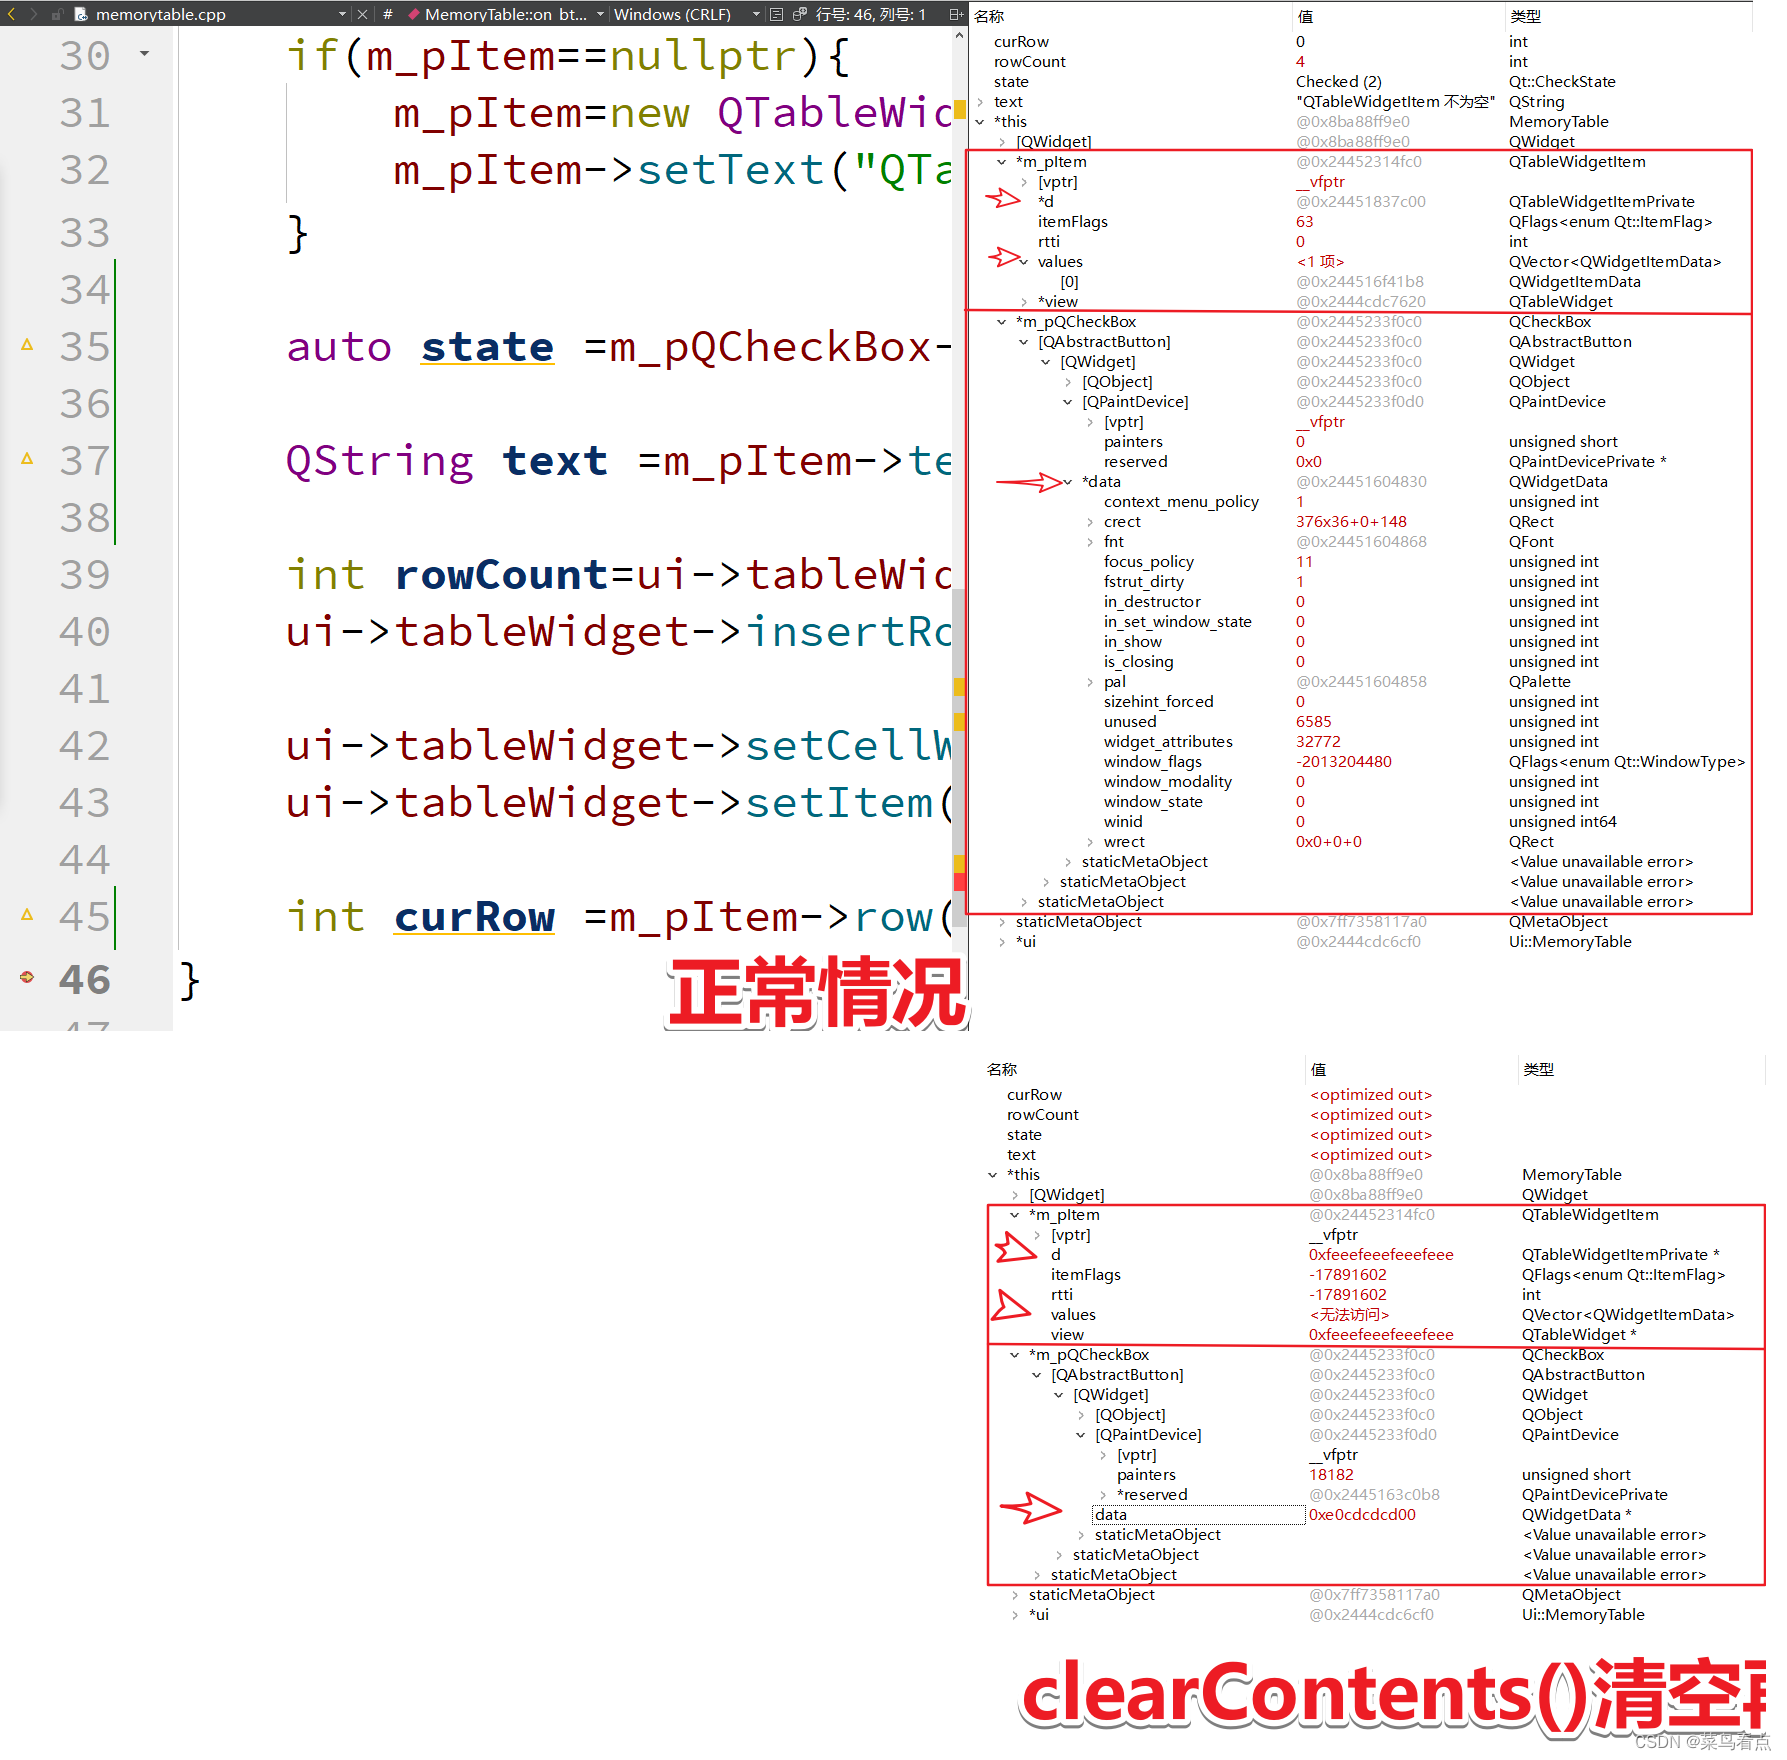 clearContents()清空再执行添加